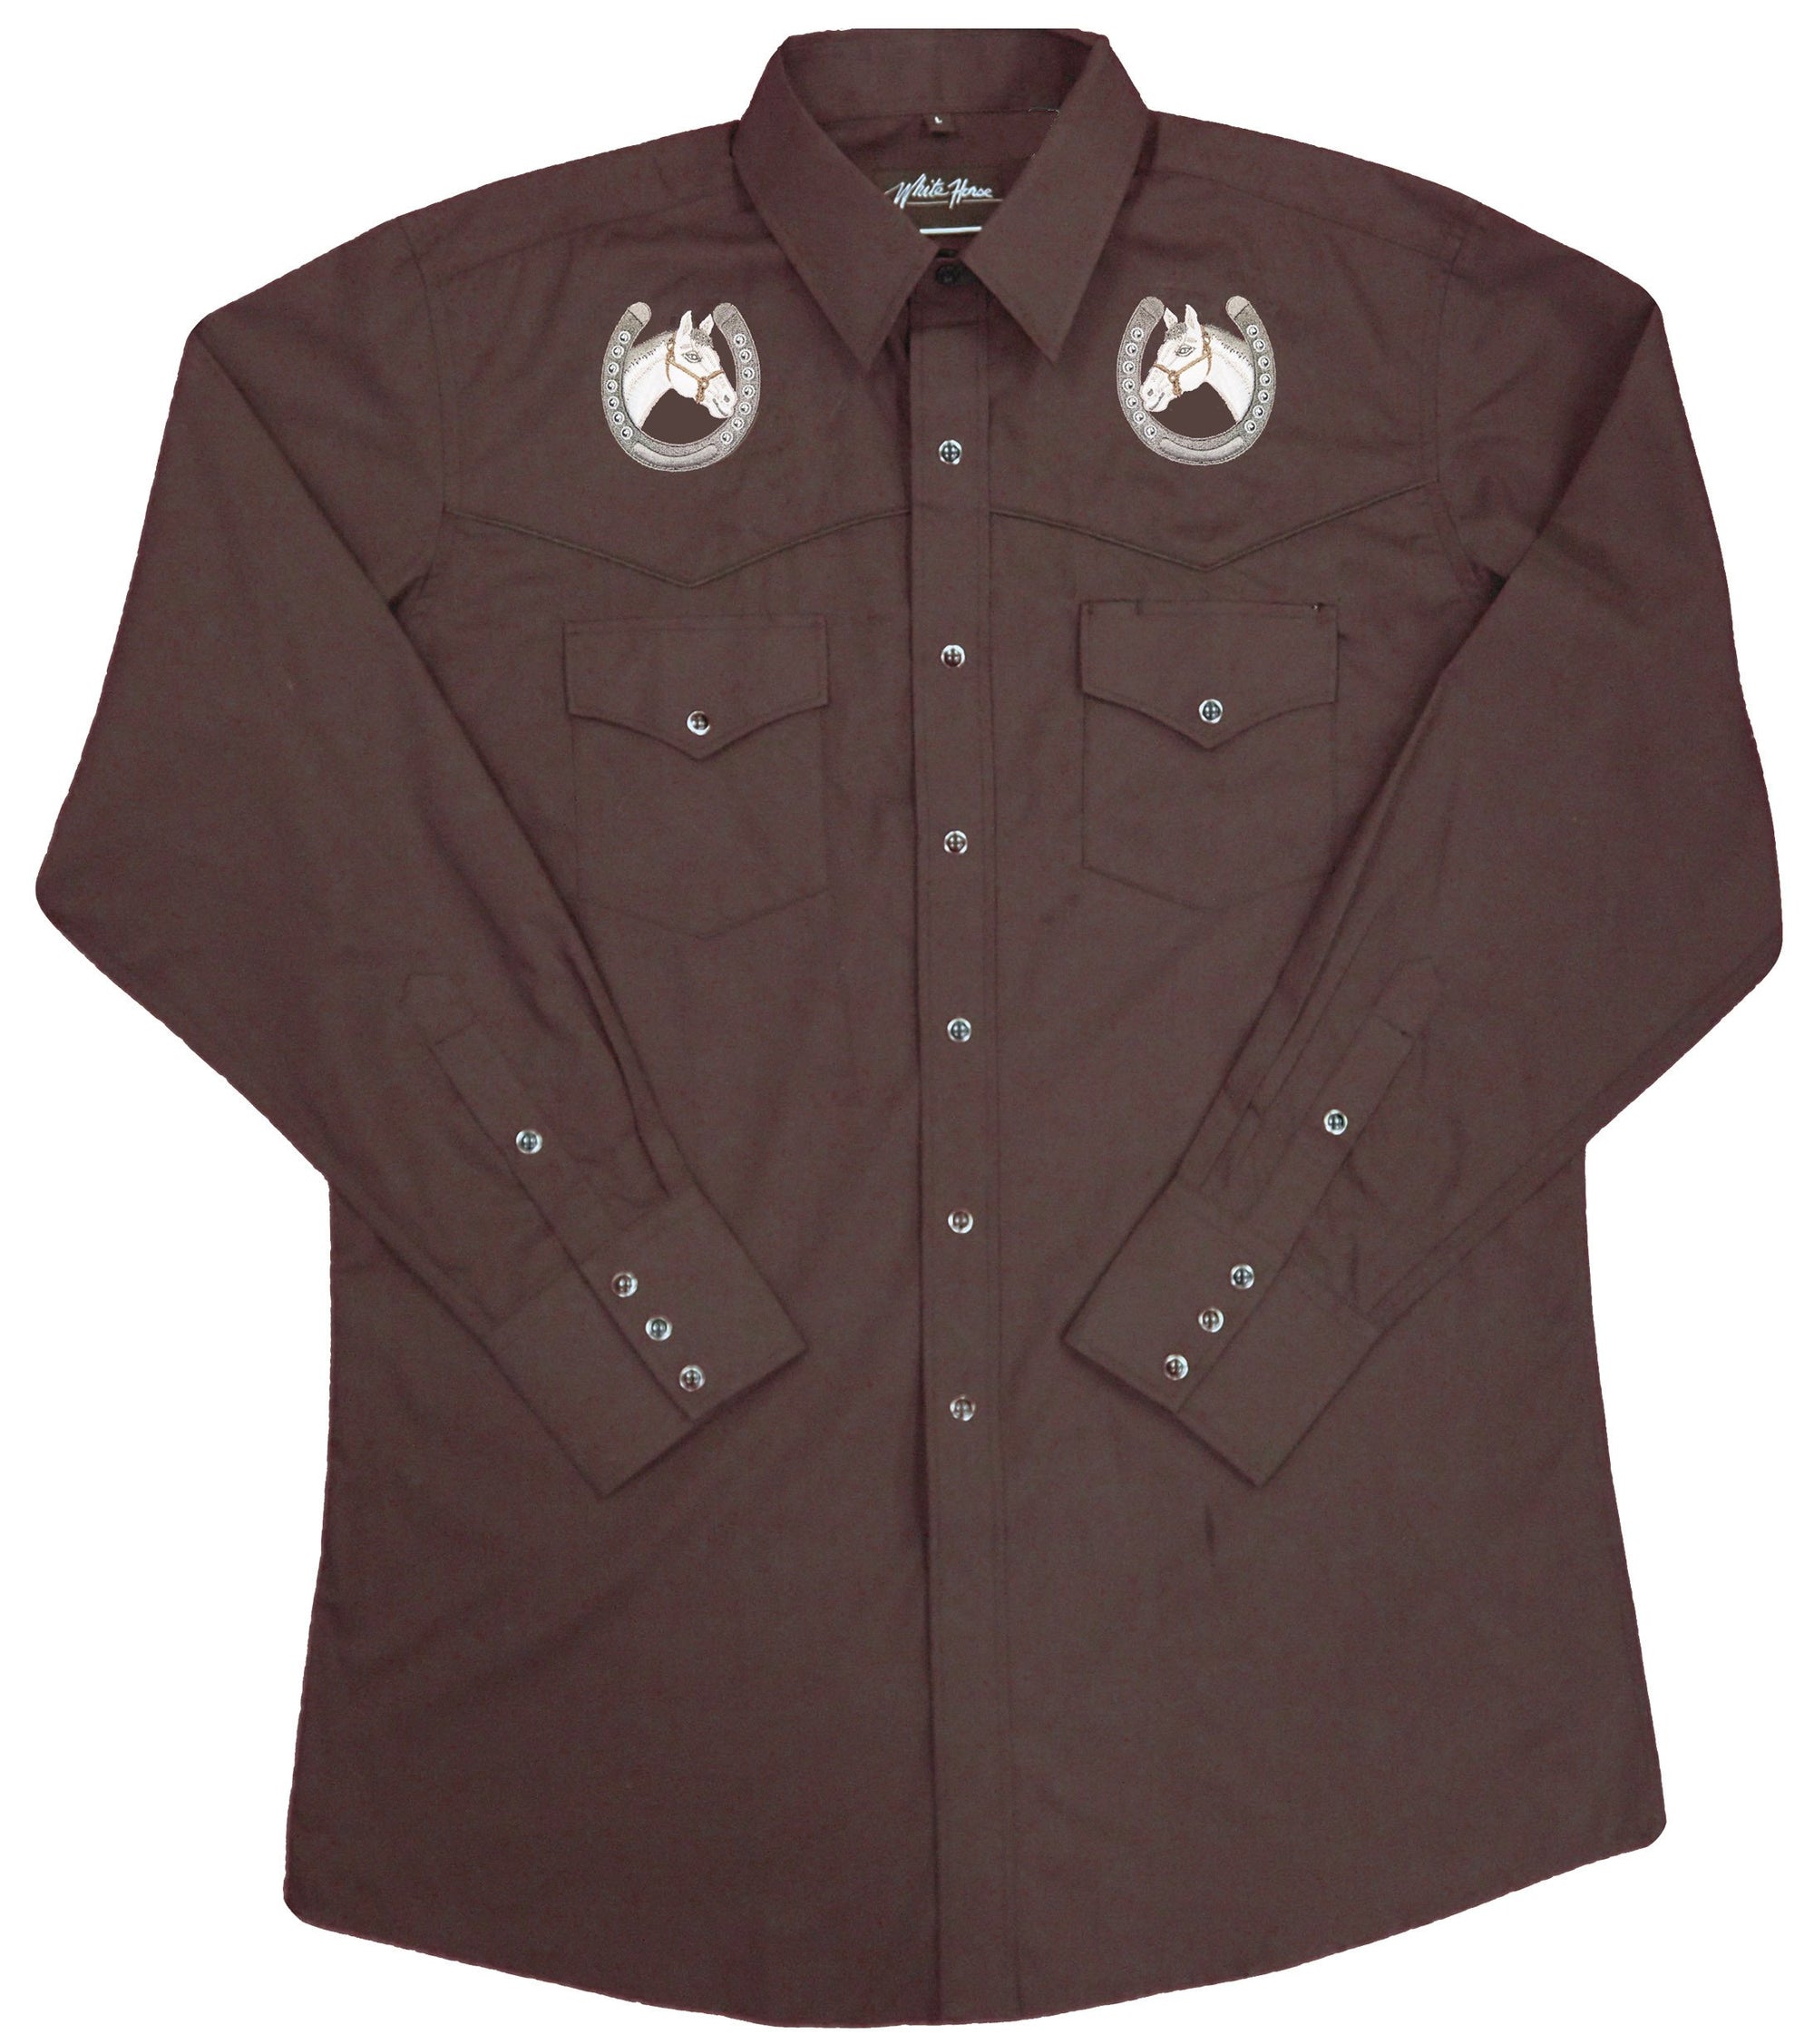 White Horse Apparel Men's Western Shirt Embroidered Yokes Horse Heads